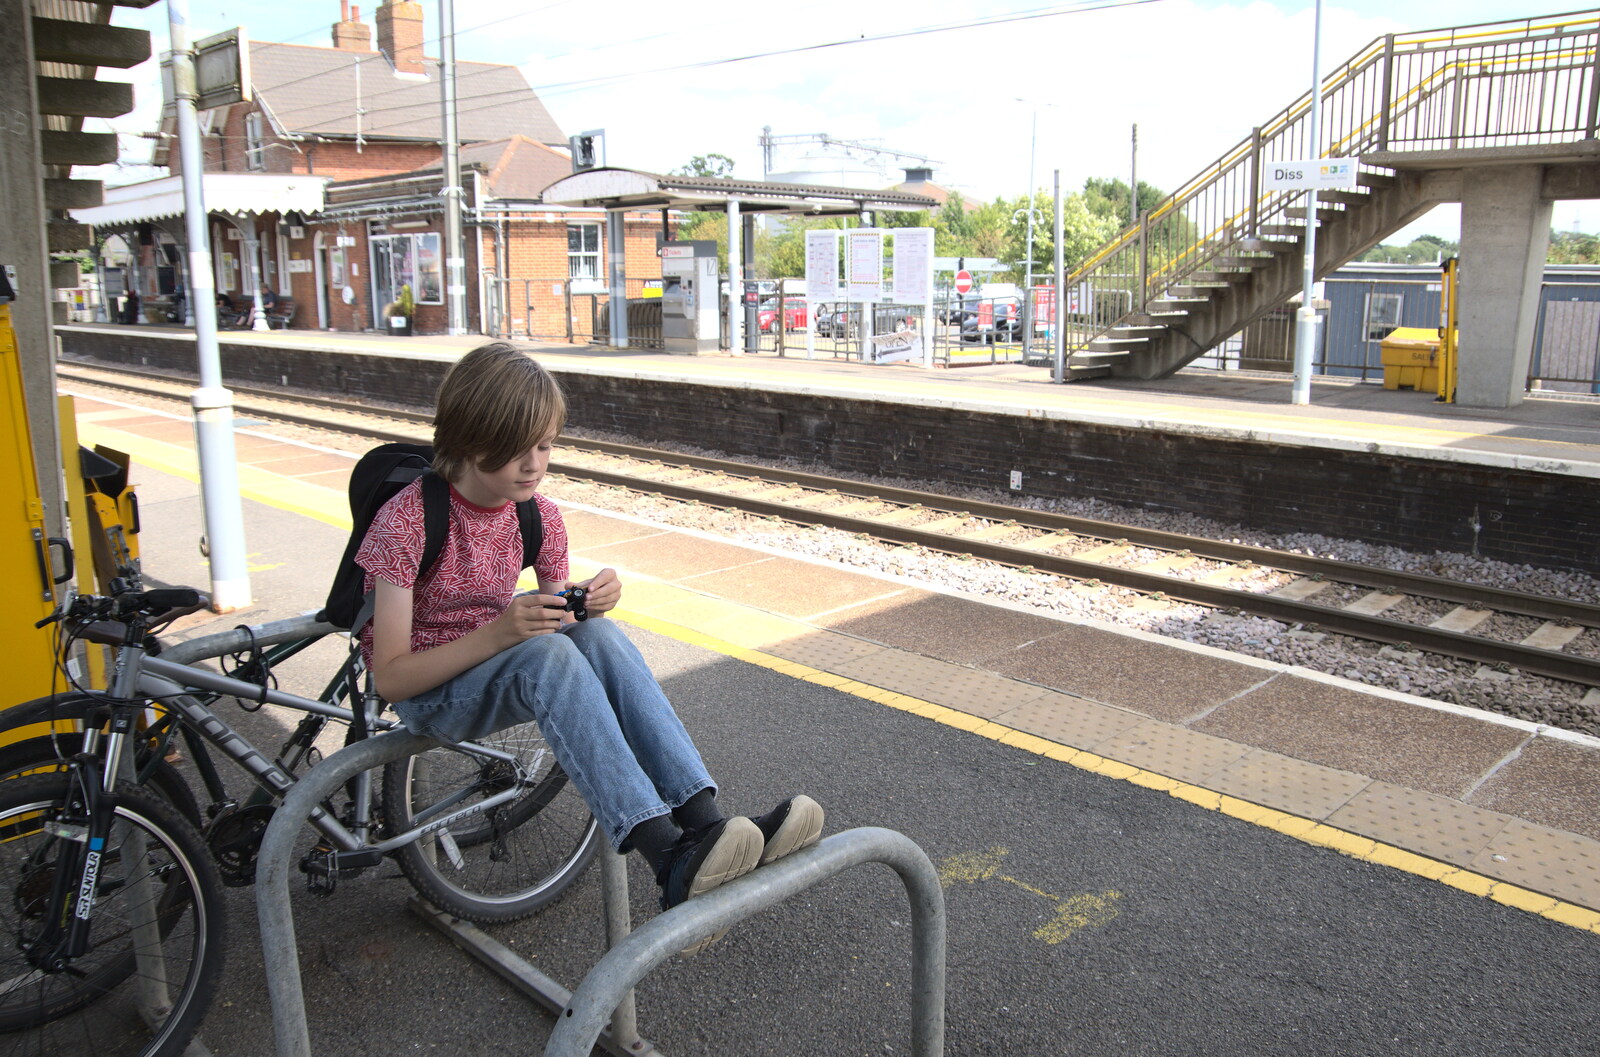 A July Miscellany, Diss, Eye and Norwich - 23rd July 2022: Harry on the bike racks as we wait for the train